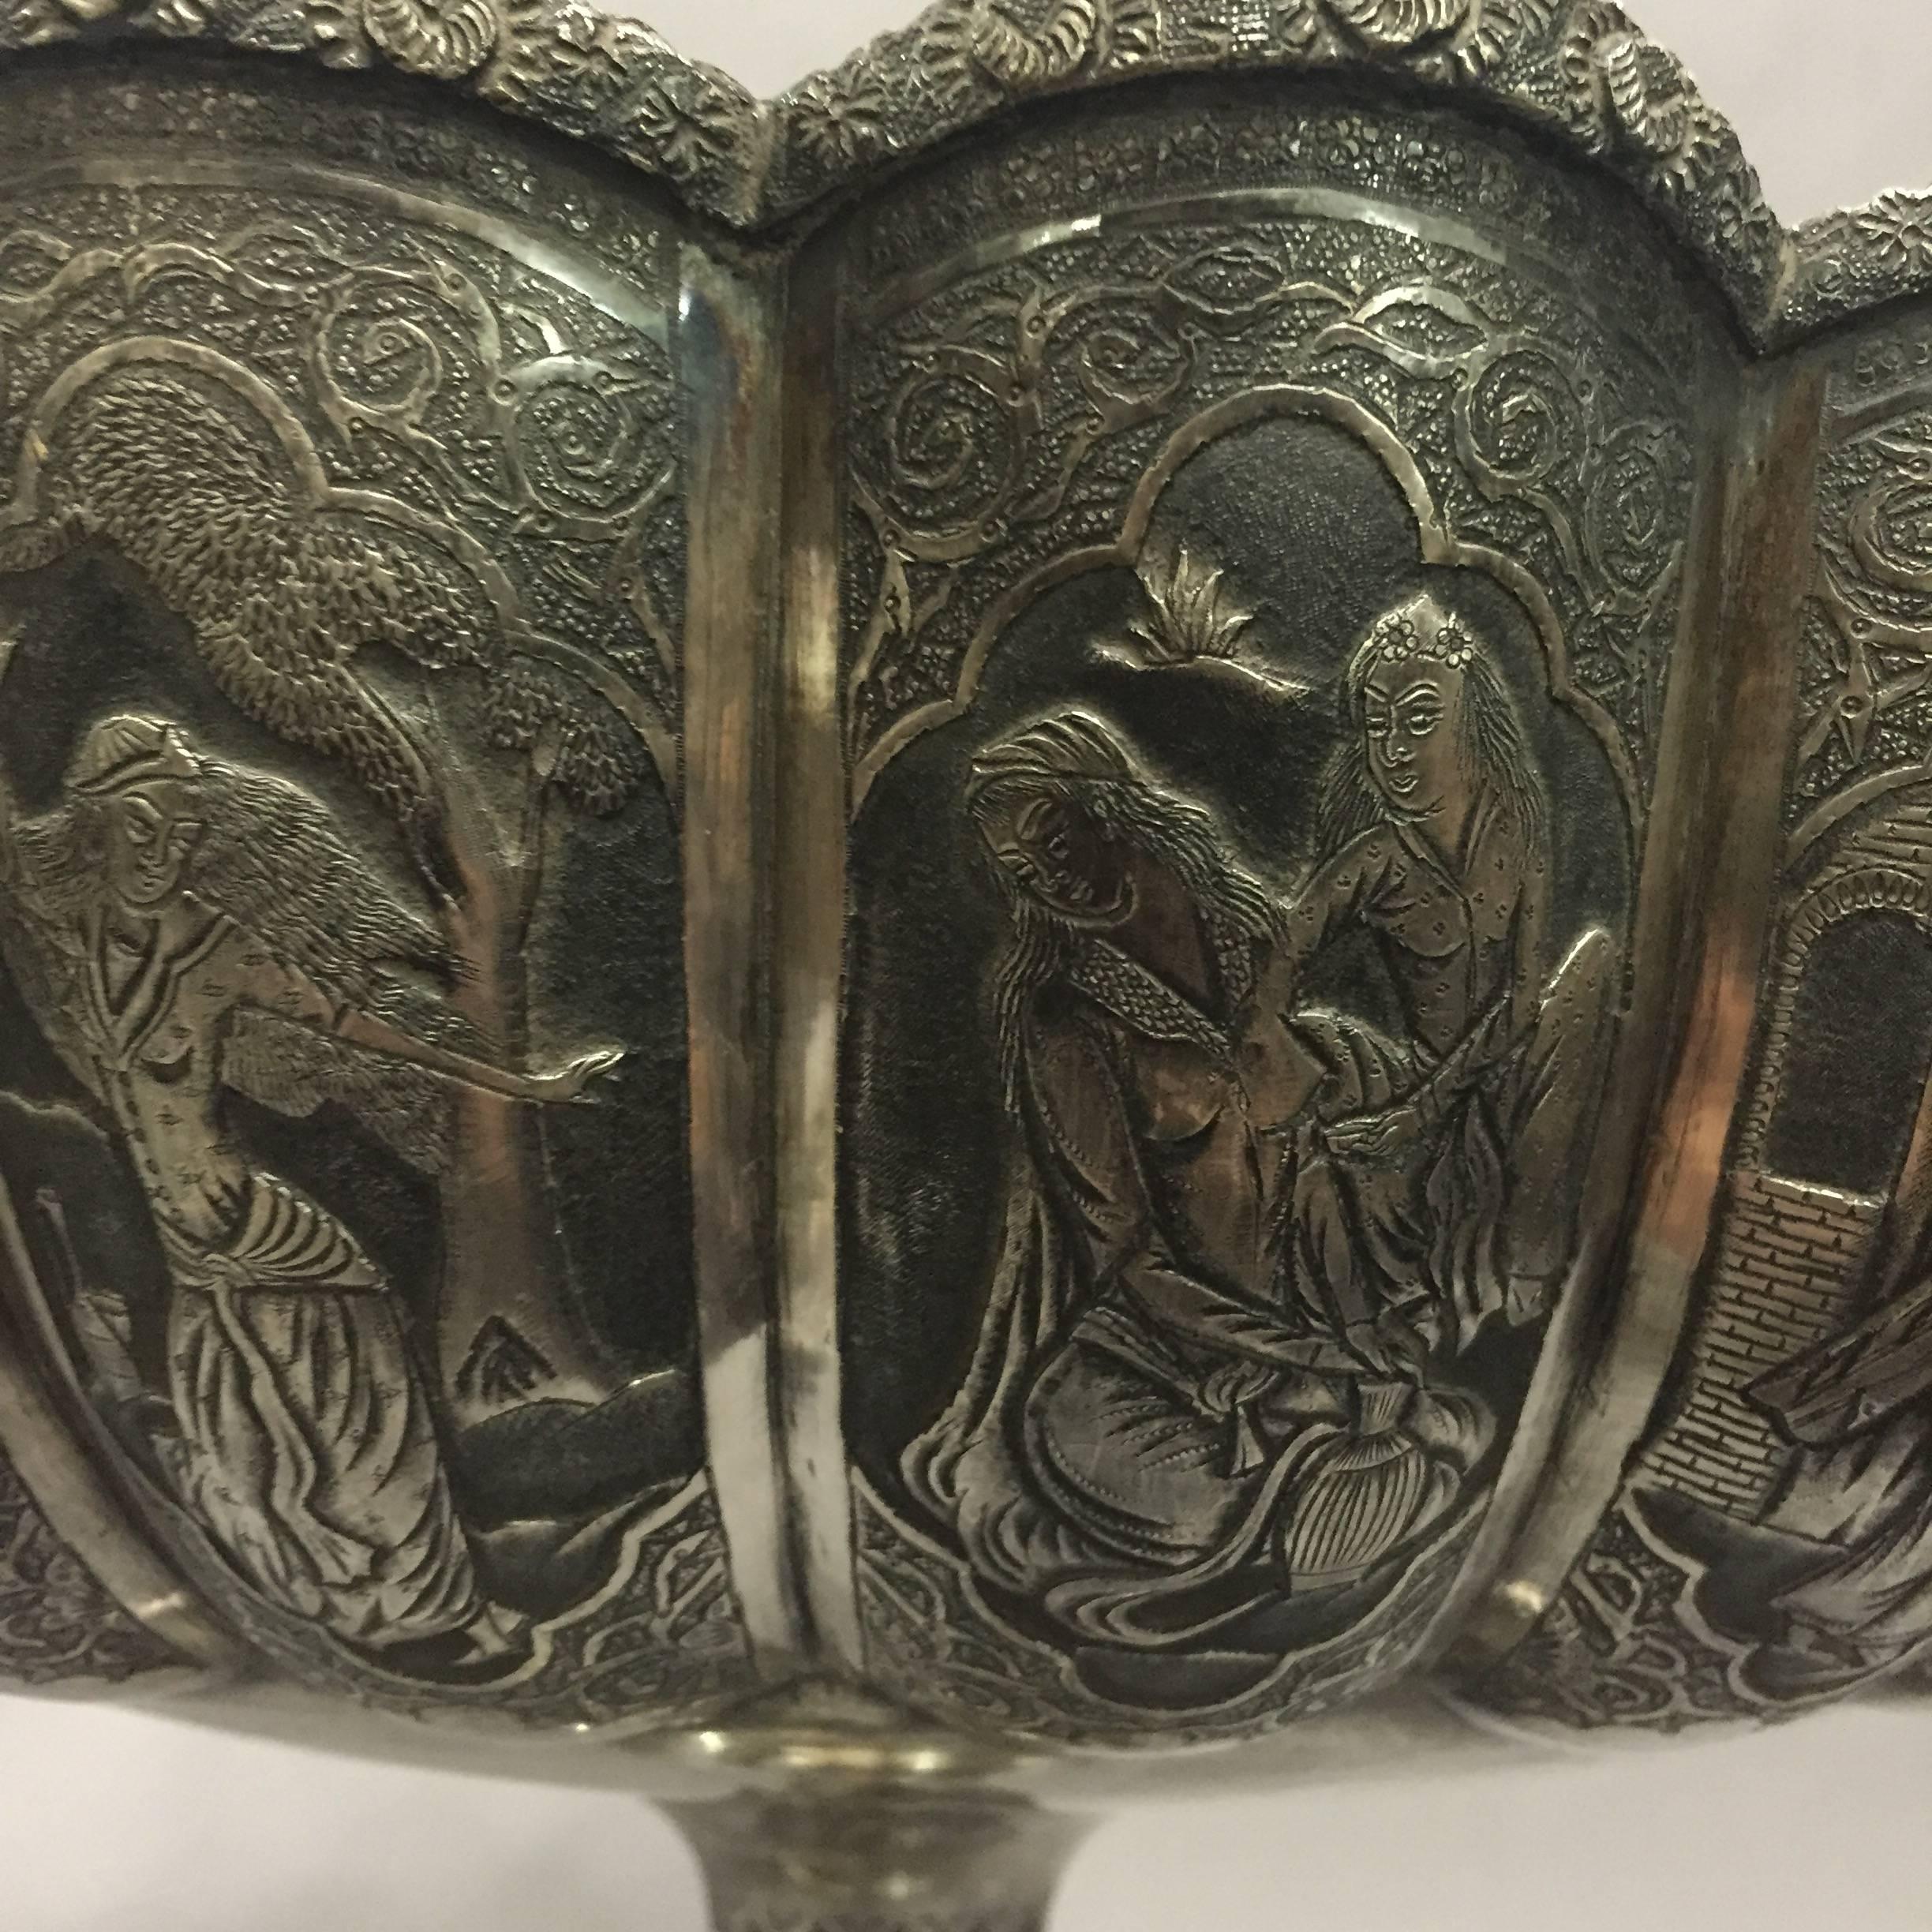 The narrative of the 'Rubbaiyat of Omar Khayyam' takes form around the top of this Isfahan silver footed basin made by Parvarish in the late 19th century. 
It is marked on the foot with the 84 silver hallmark, along with Arabic marks. Beautiful